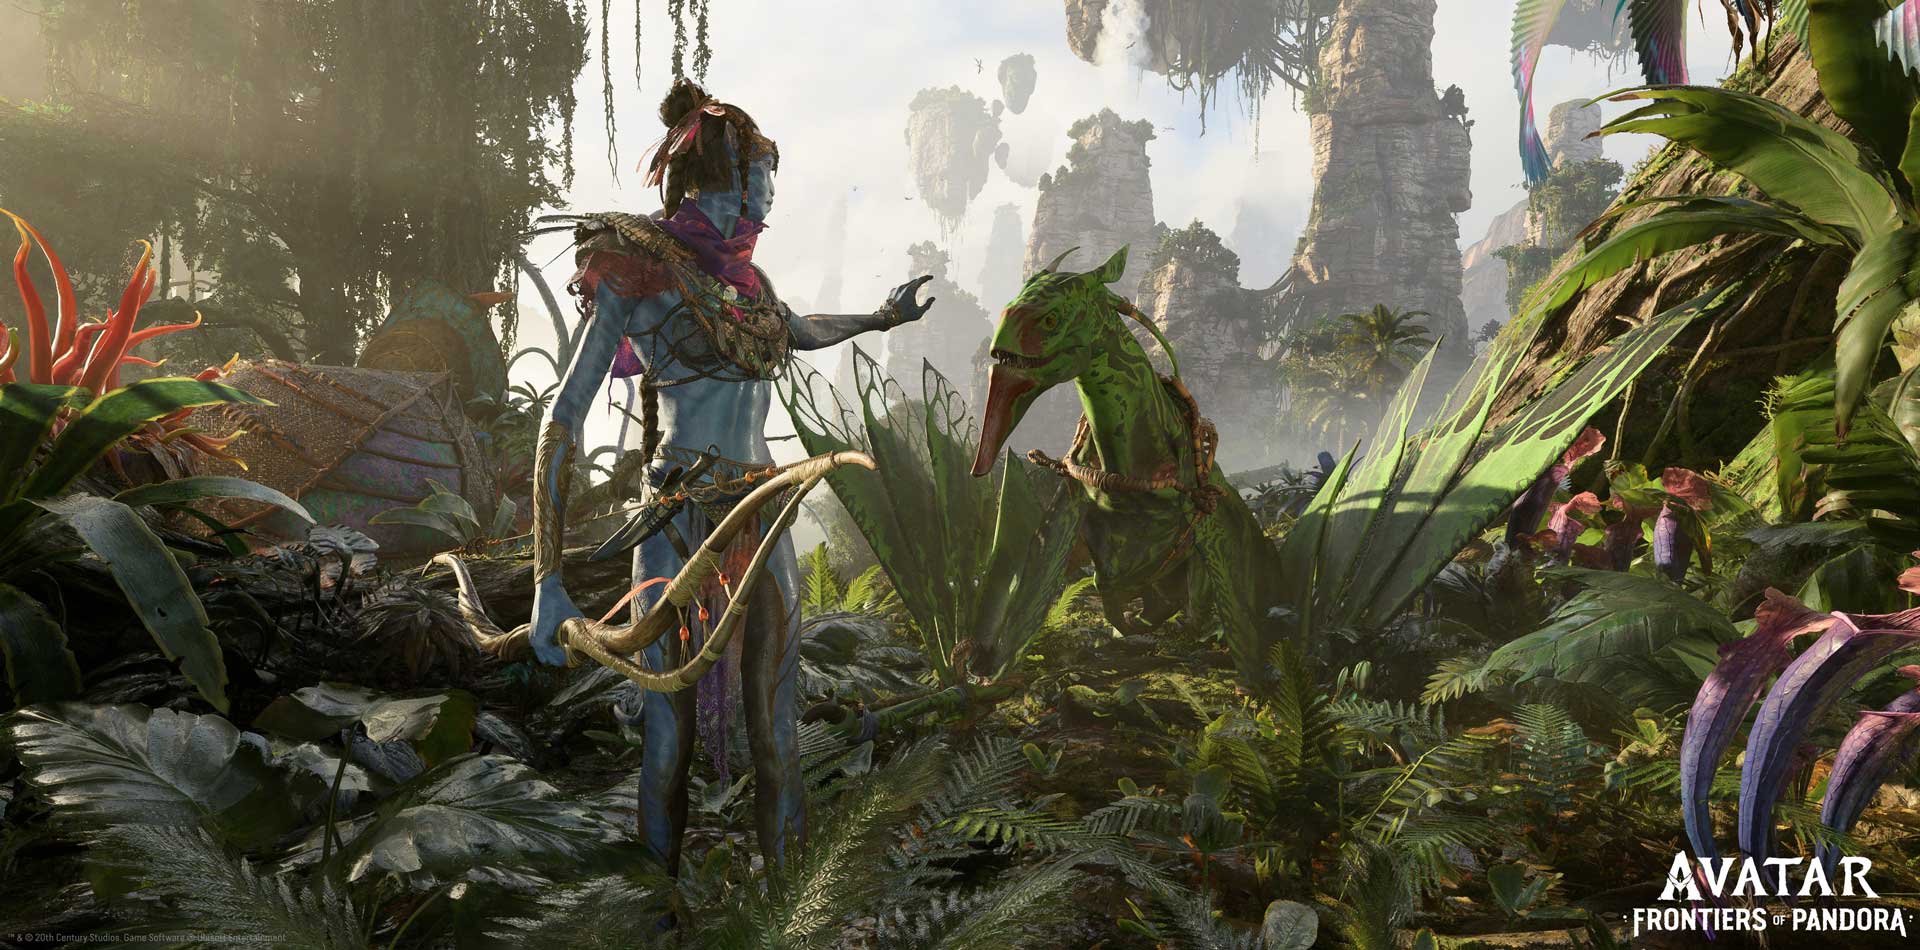 Ubisoft is Making Avatar: Frontiers of Pandora and it Looks Incredible